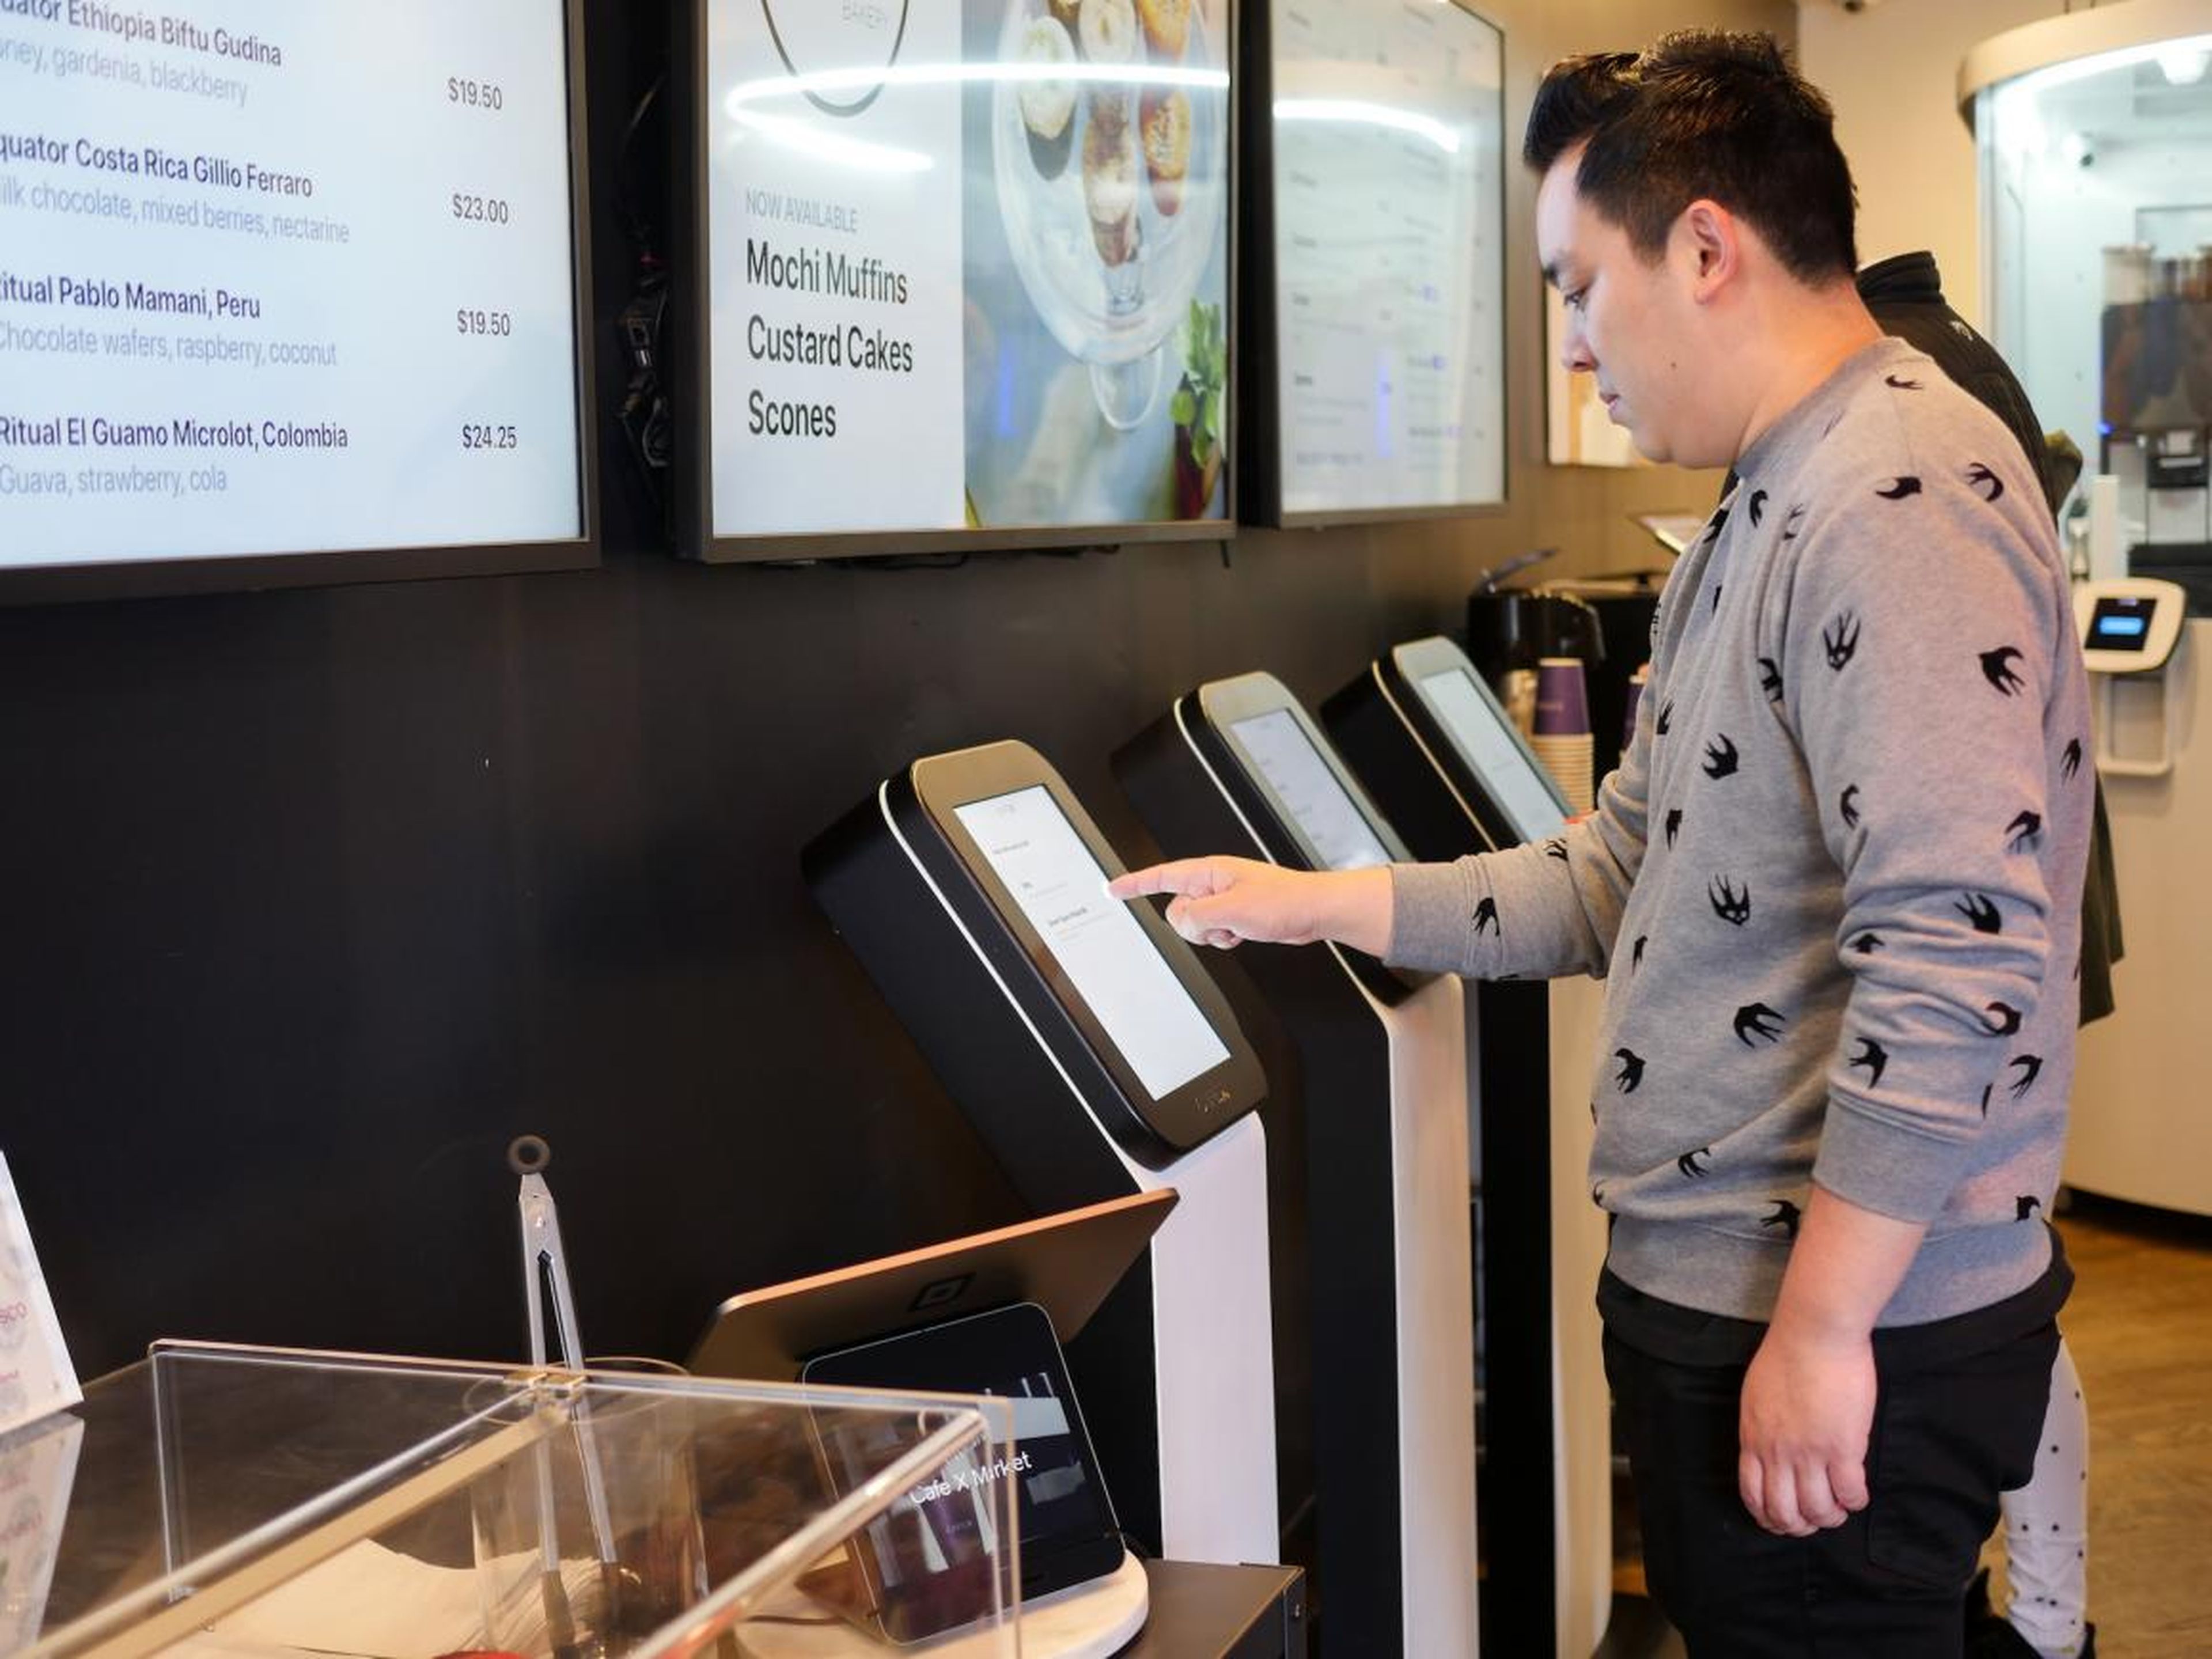 At CafeX, customers ordered at digital kiosks.